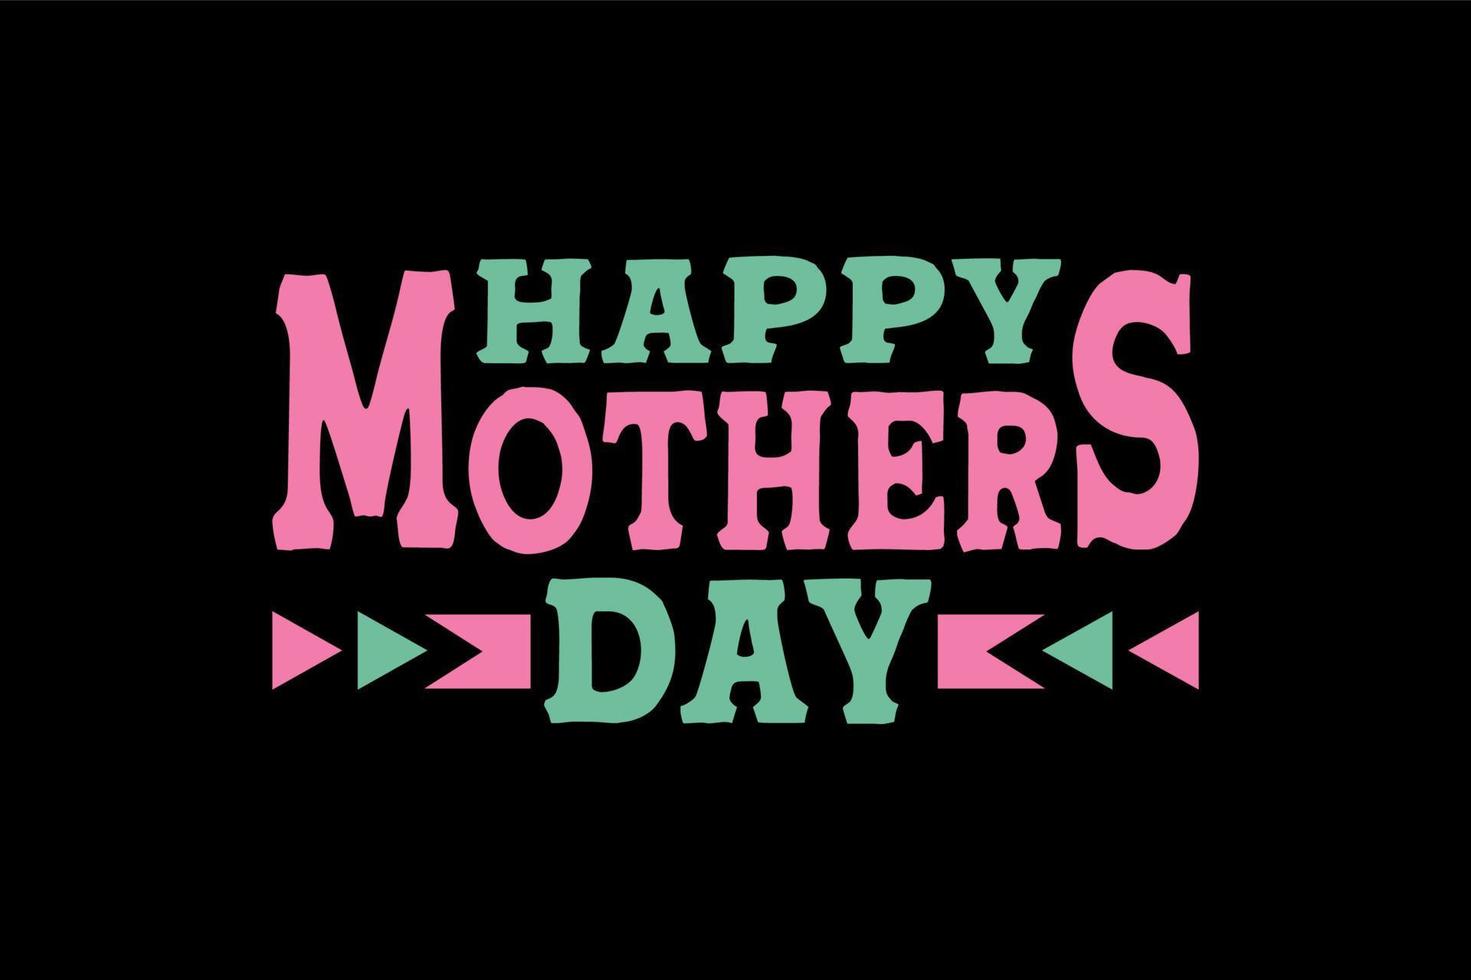 Happy mothers day, mothers day t shirt design vector